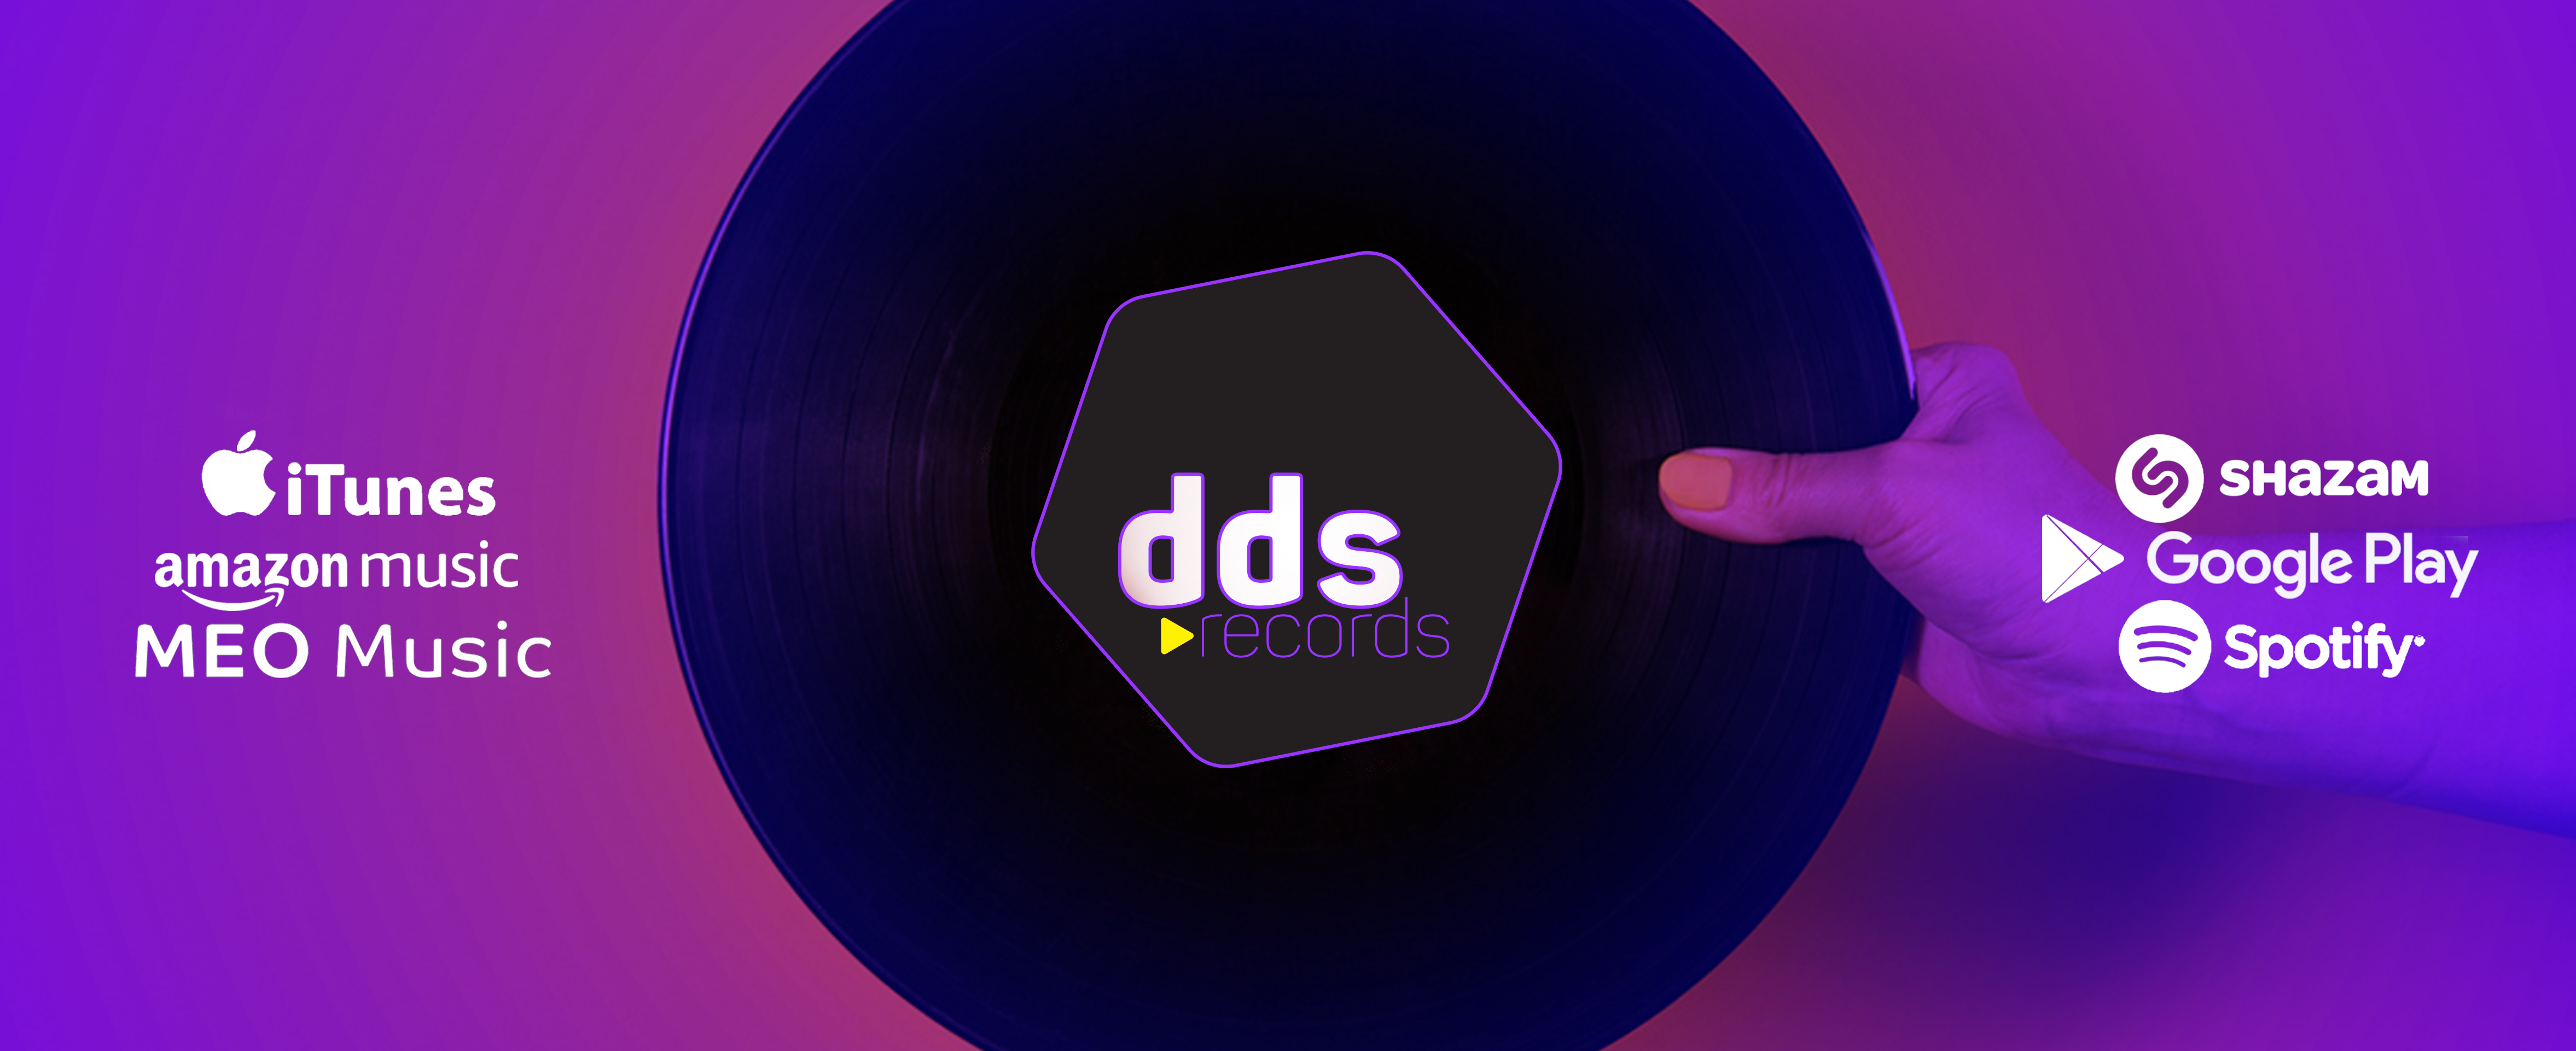 DDS-RECORDS-SITE